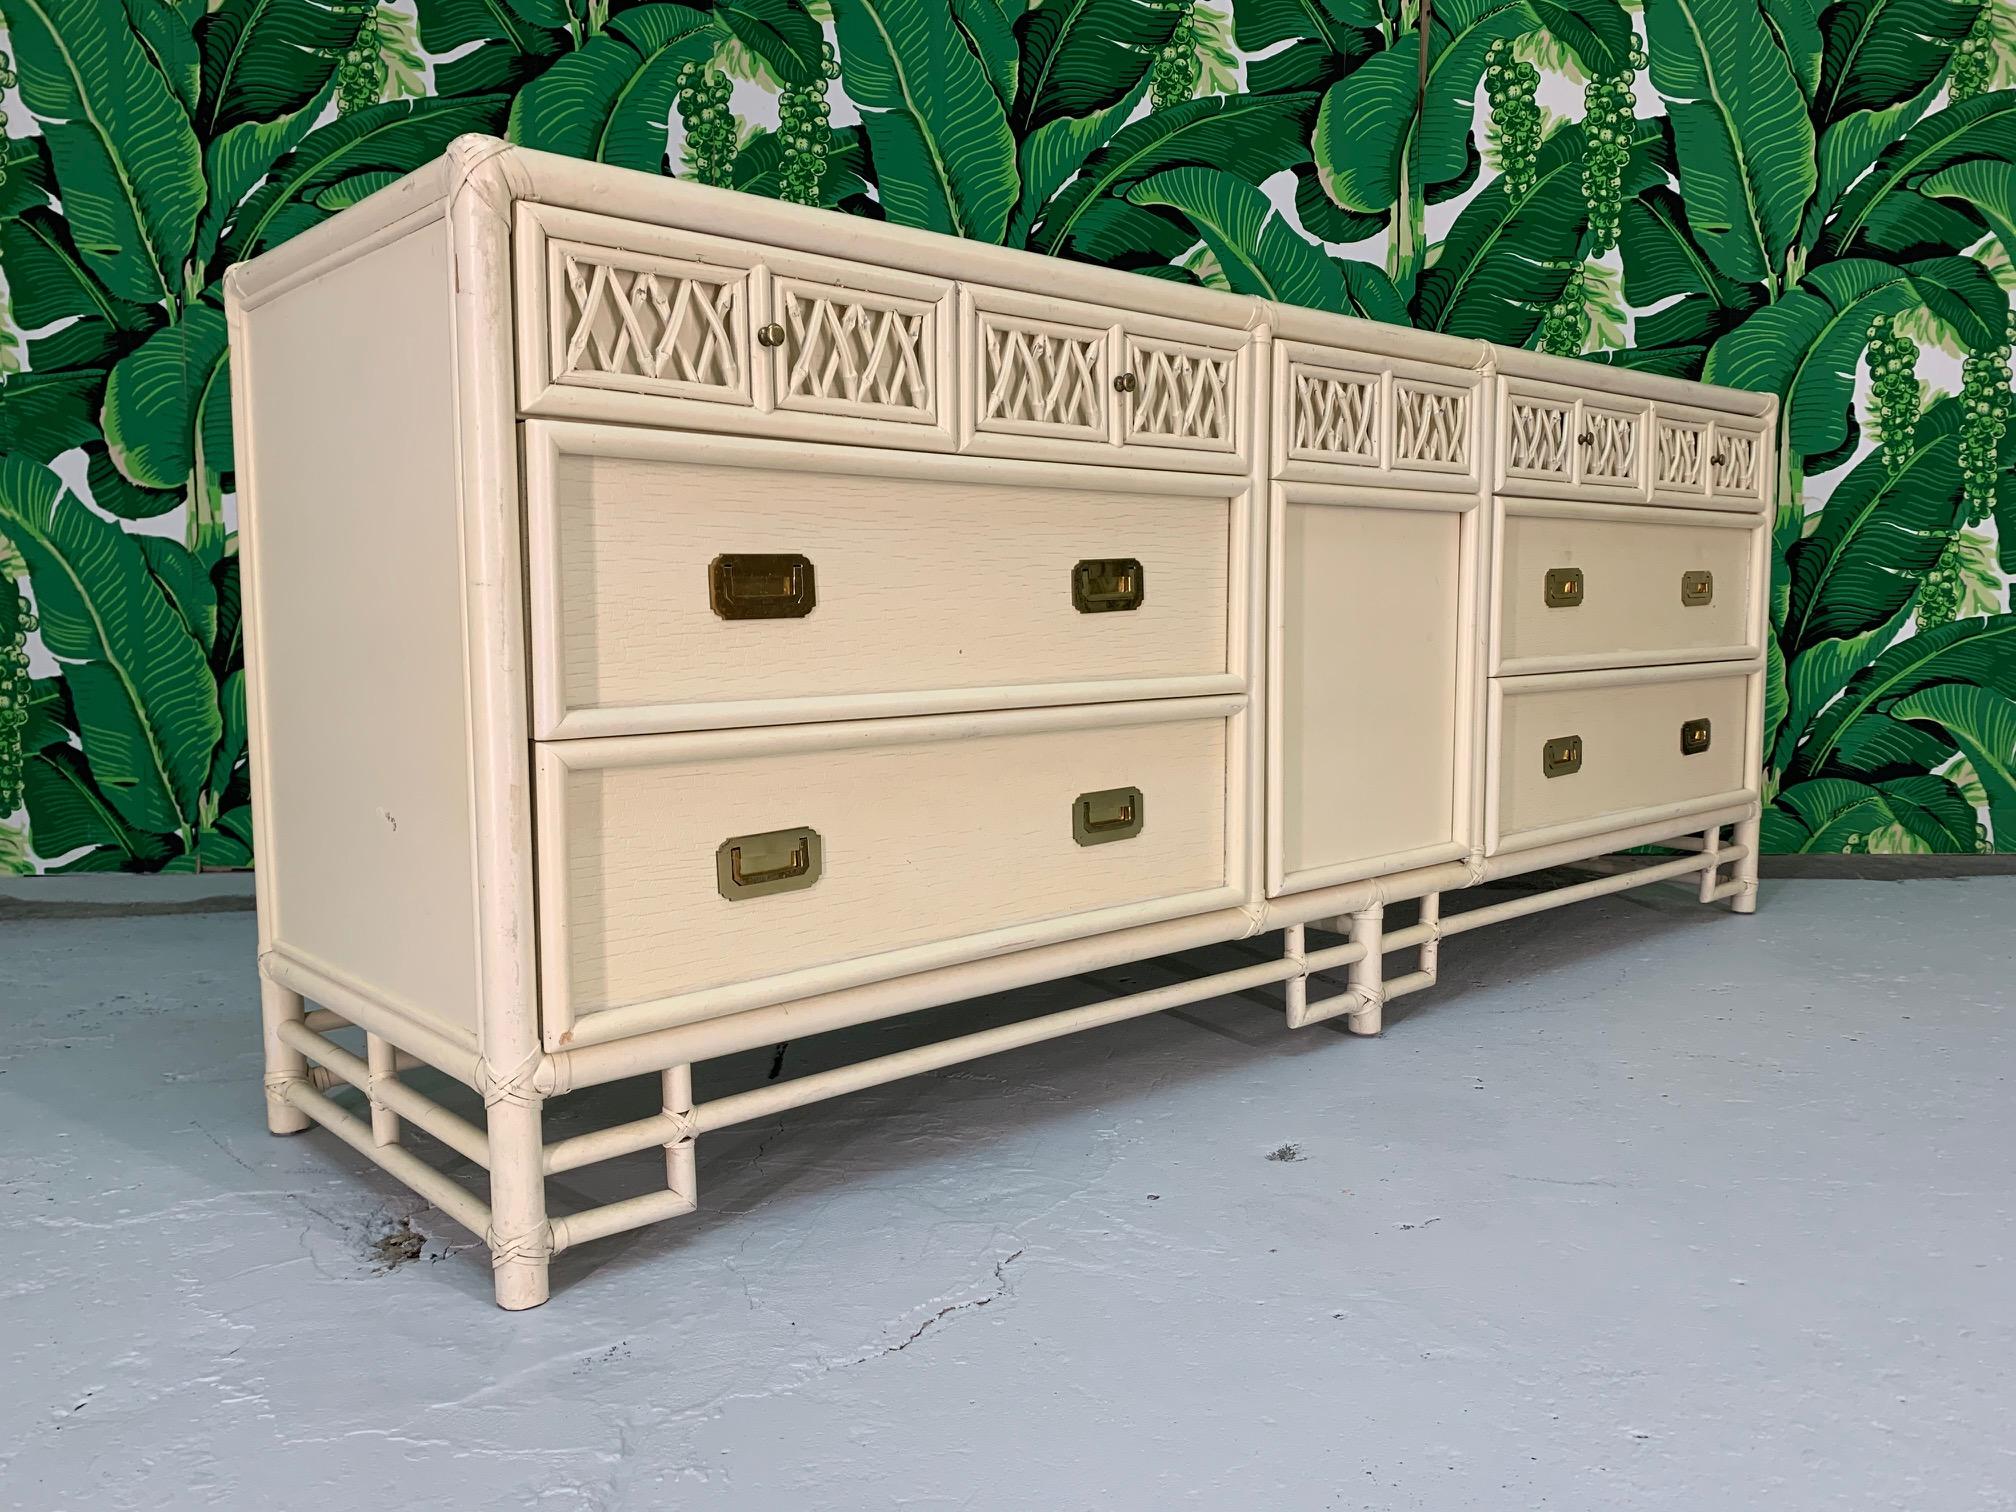 Vintage bamboo dresser features rattan lattice drawer fronts and brass hardware. Cream colored finish. Good vintage condition with minor abrasions to finish, structurally sound condition.